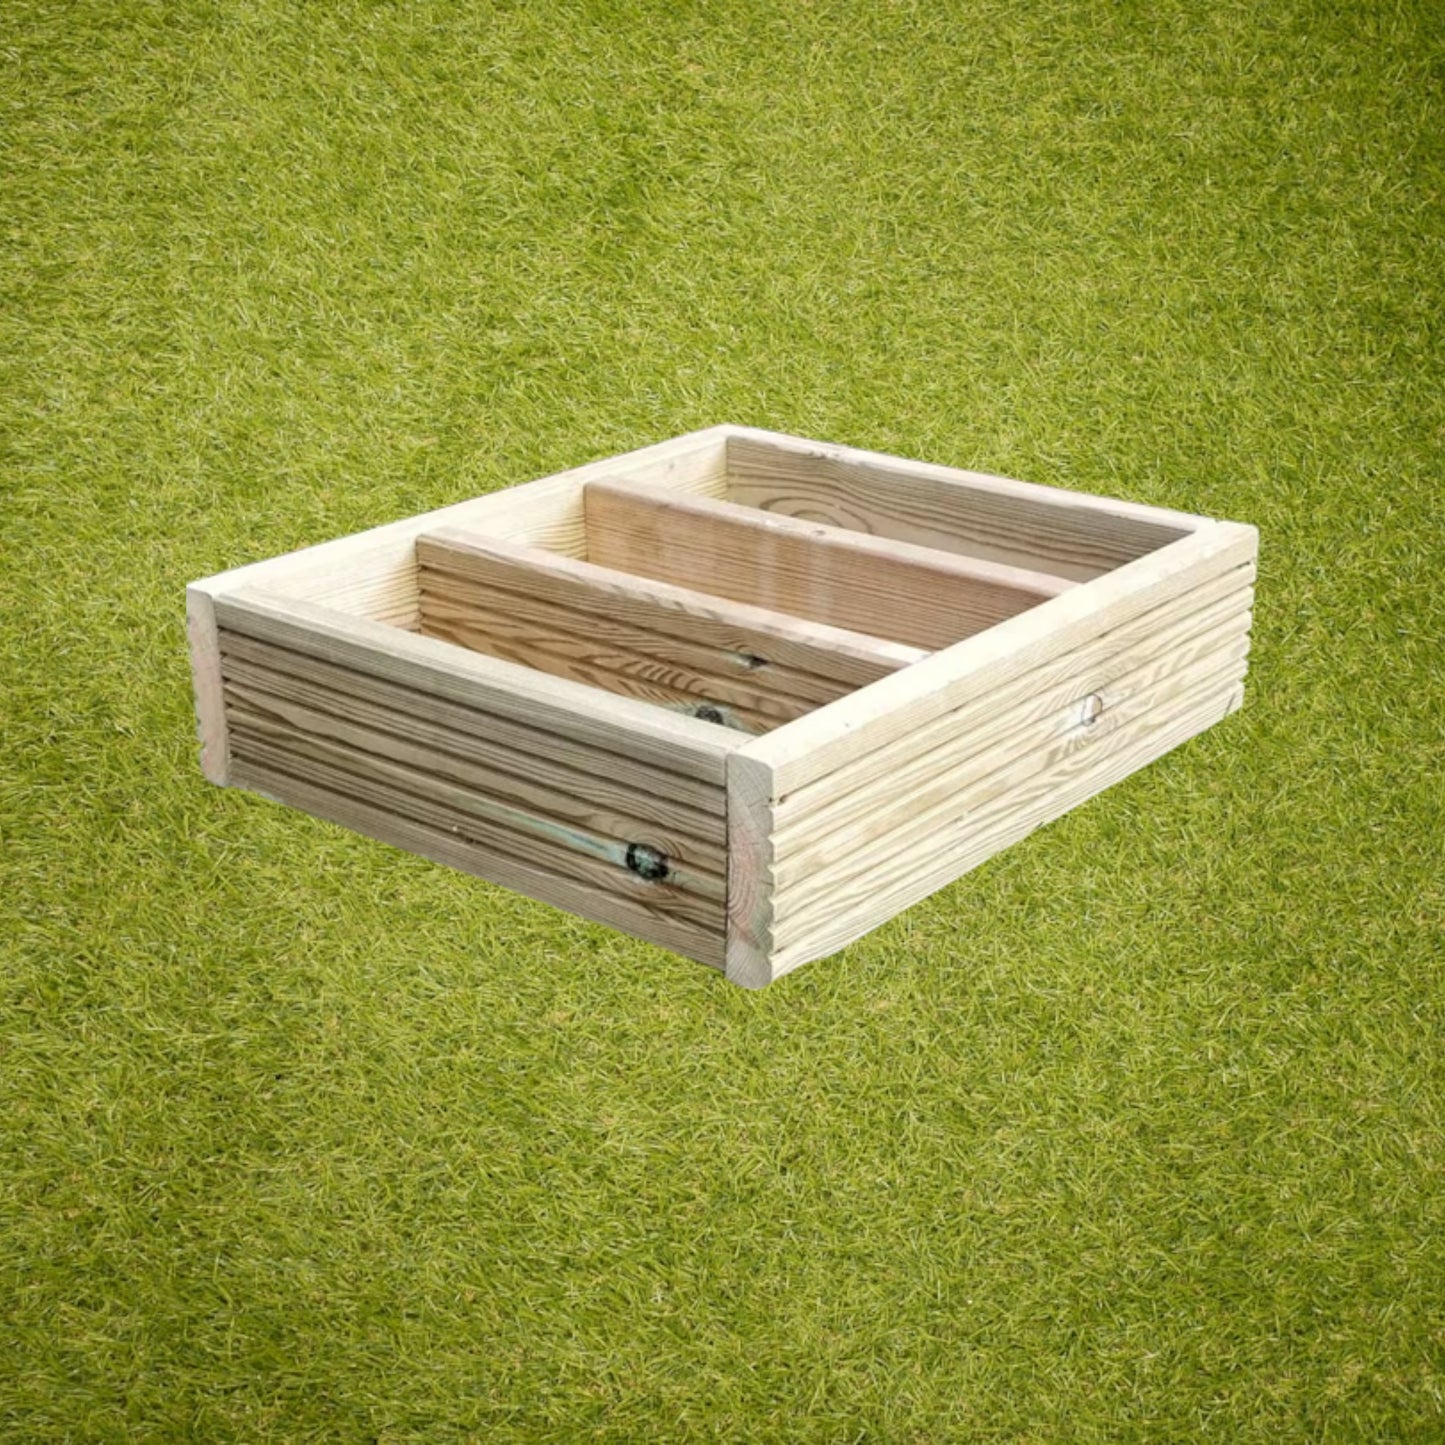 Grow UR Own - Herb Planter 3 & 6 Section